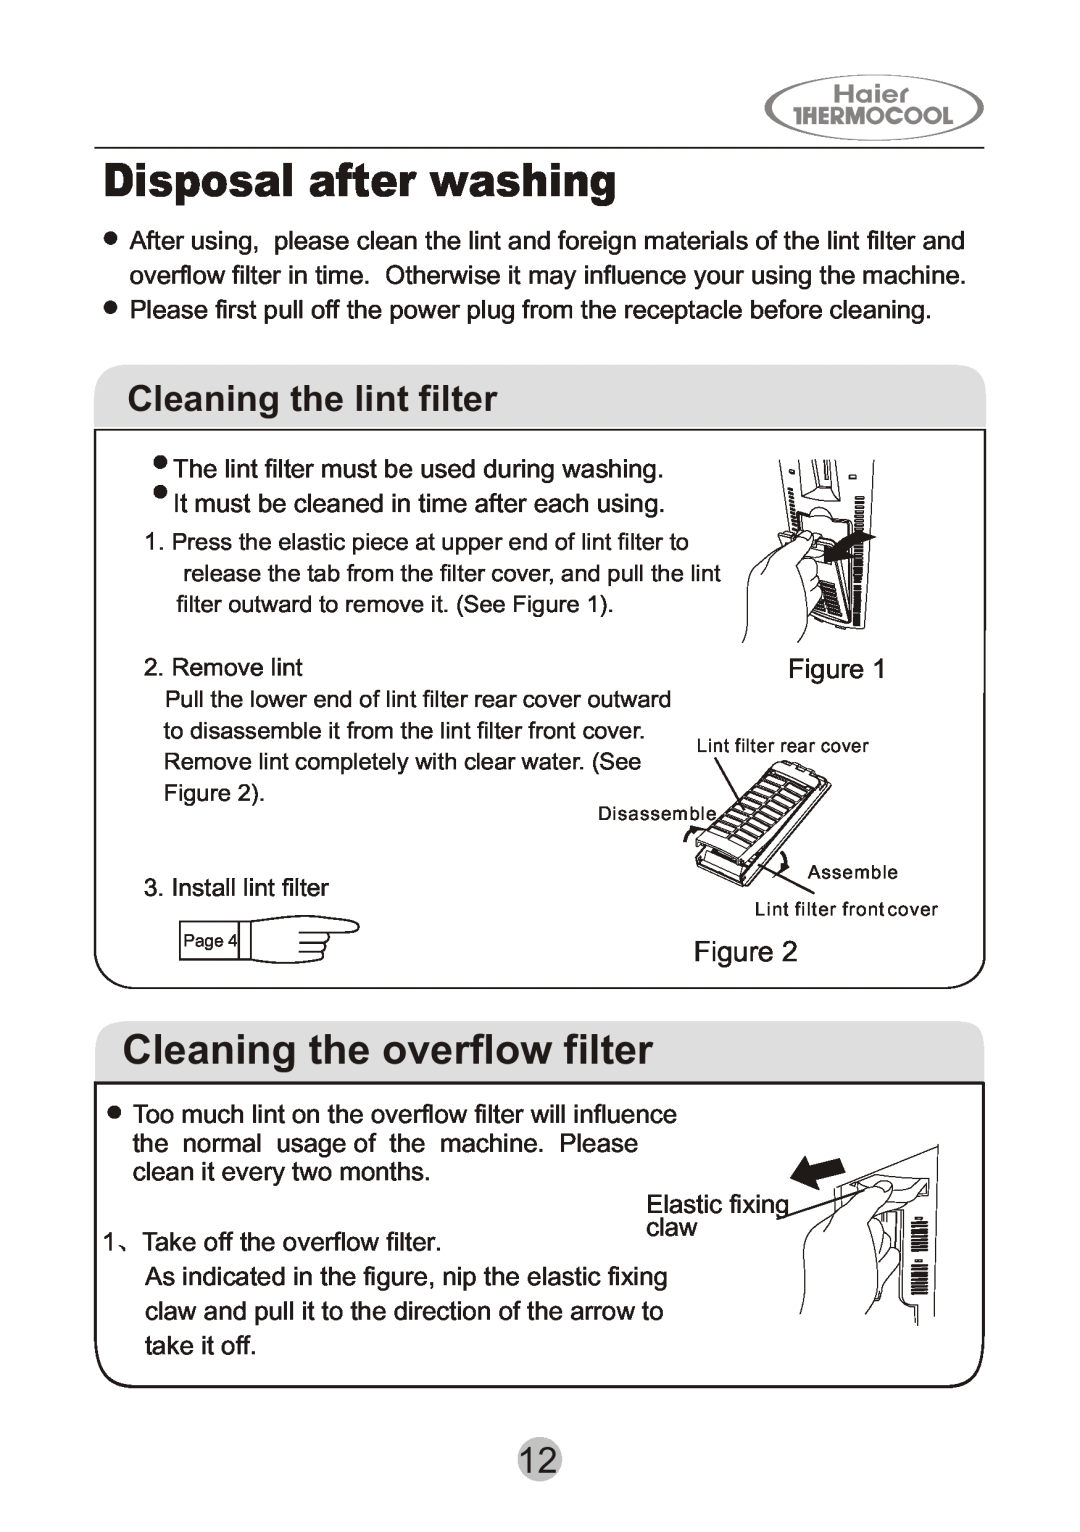 Haier HWM130-0523S user manual Disposal after washing, Cleaning the overflow filter, Cleaning the lint filter 